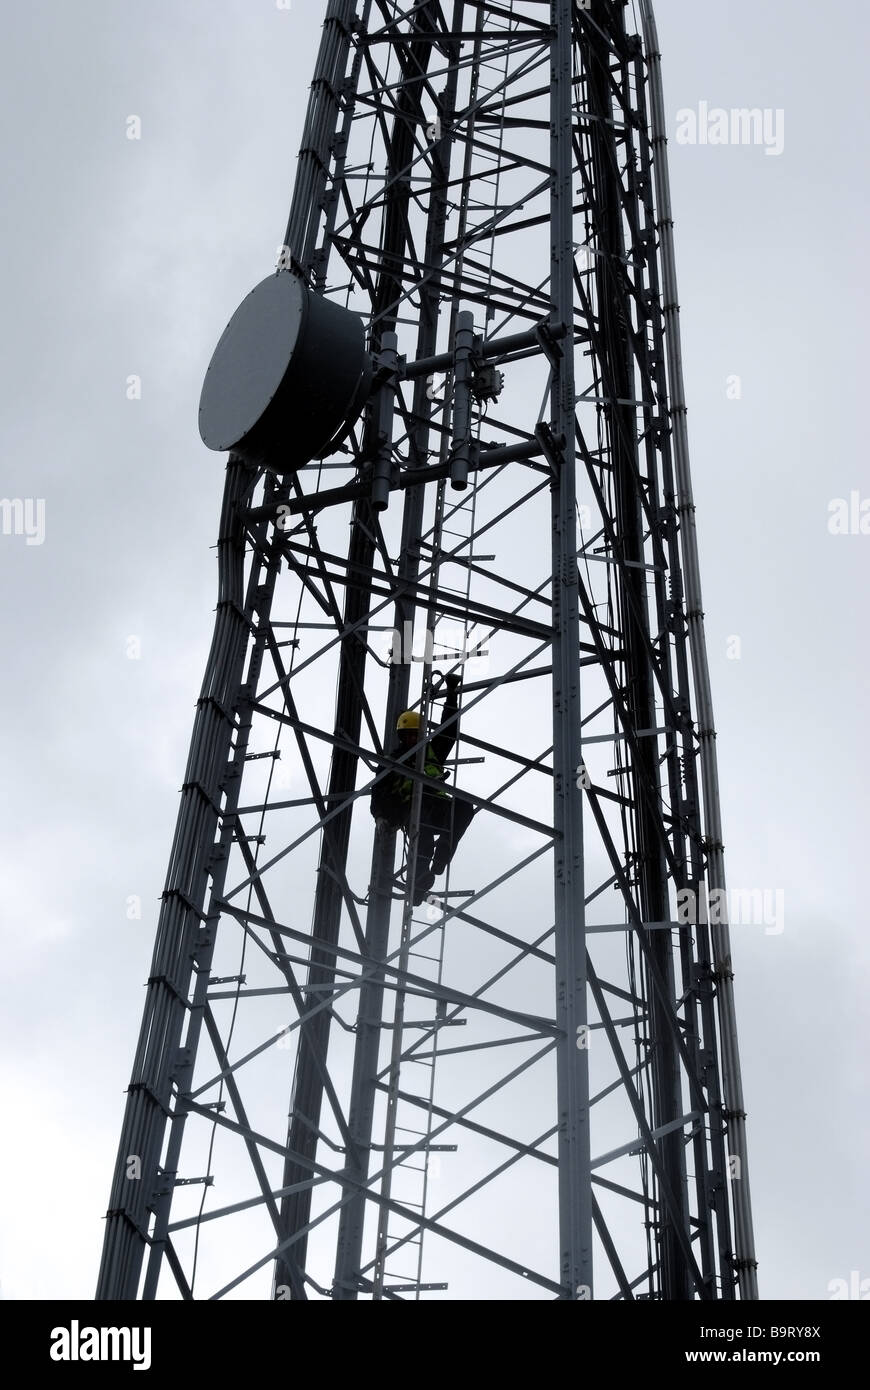 Communiction tower with technician at work Stock Photo